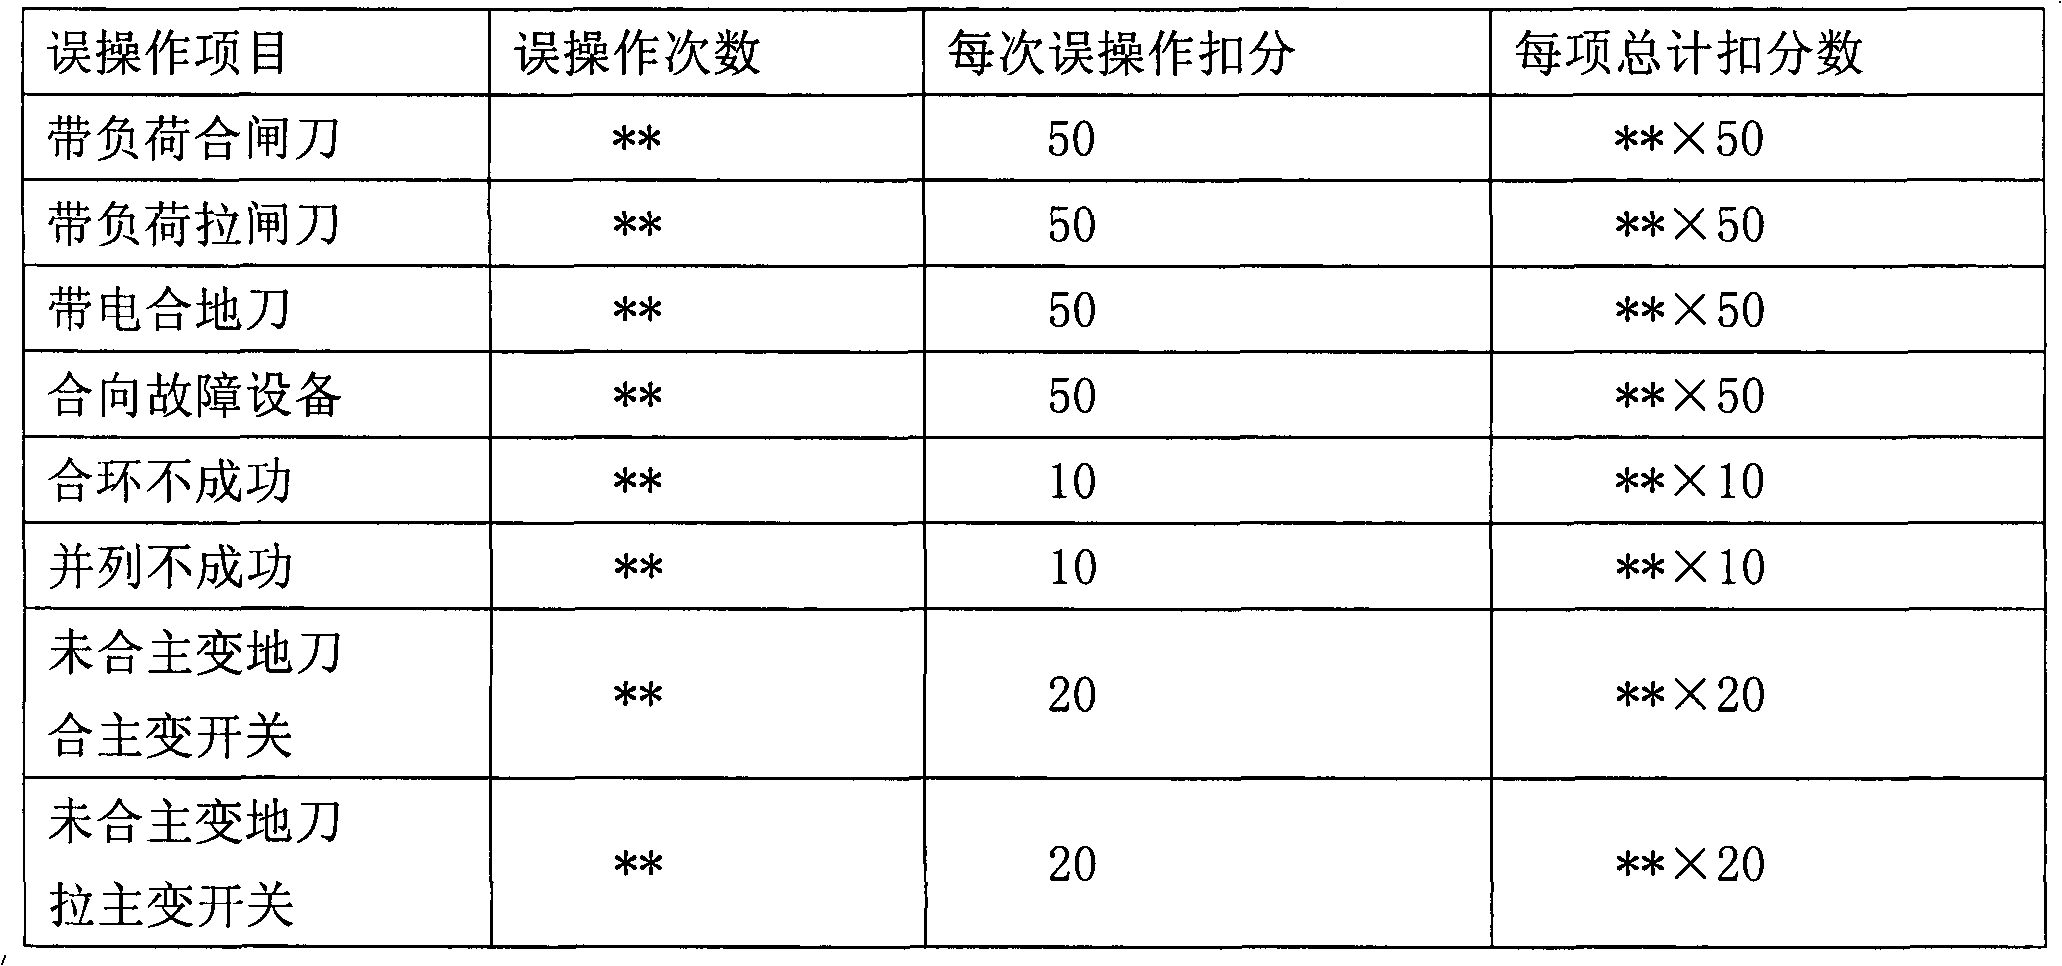 Statistic marking method of power grid interconnection training simulation system